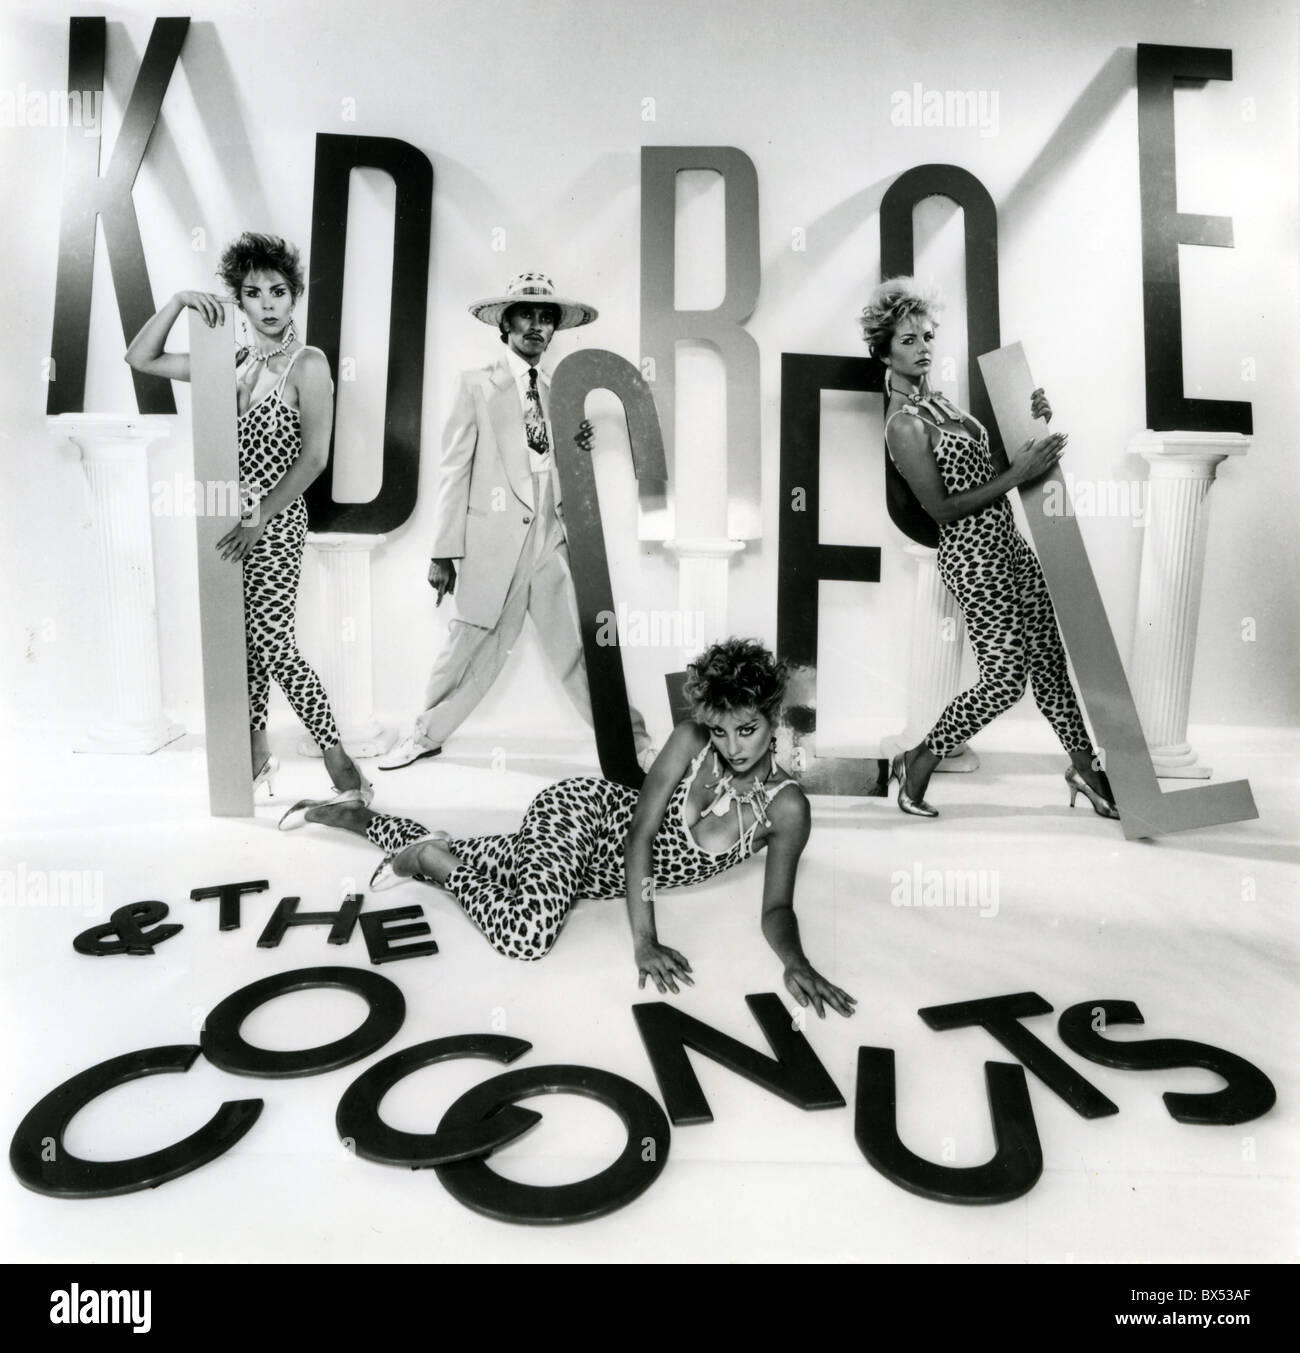 KING CREOLE AND THE COCONUTS Promotional photo of US music group about 1990 Stock Photo